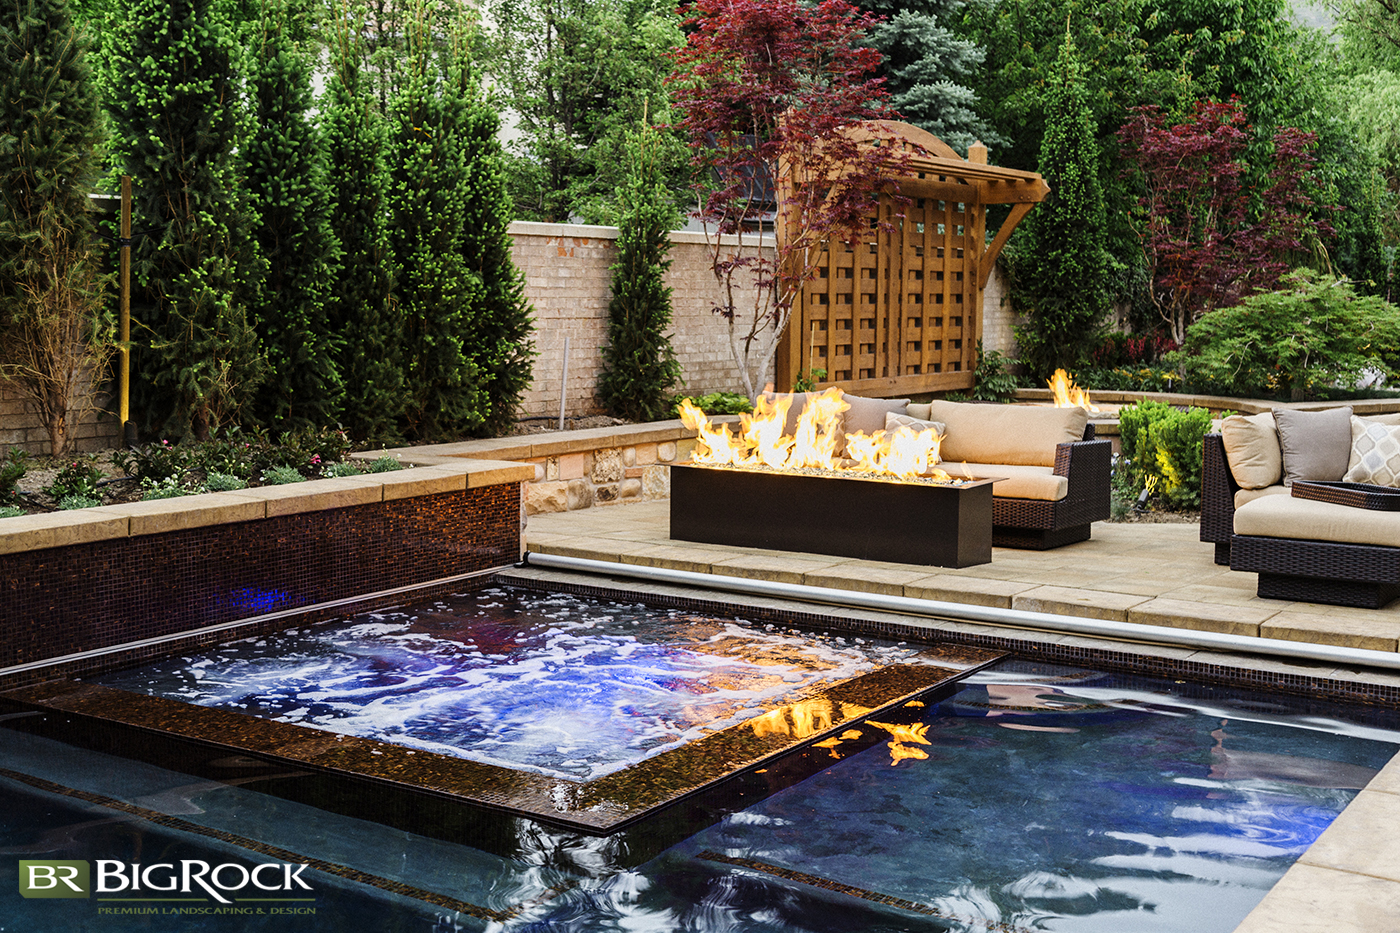 Luxury backyard pool layouts such as an integrated hot tub and garden bed lined pools create a unique and beautiful landscaping design.